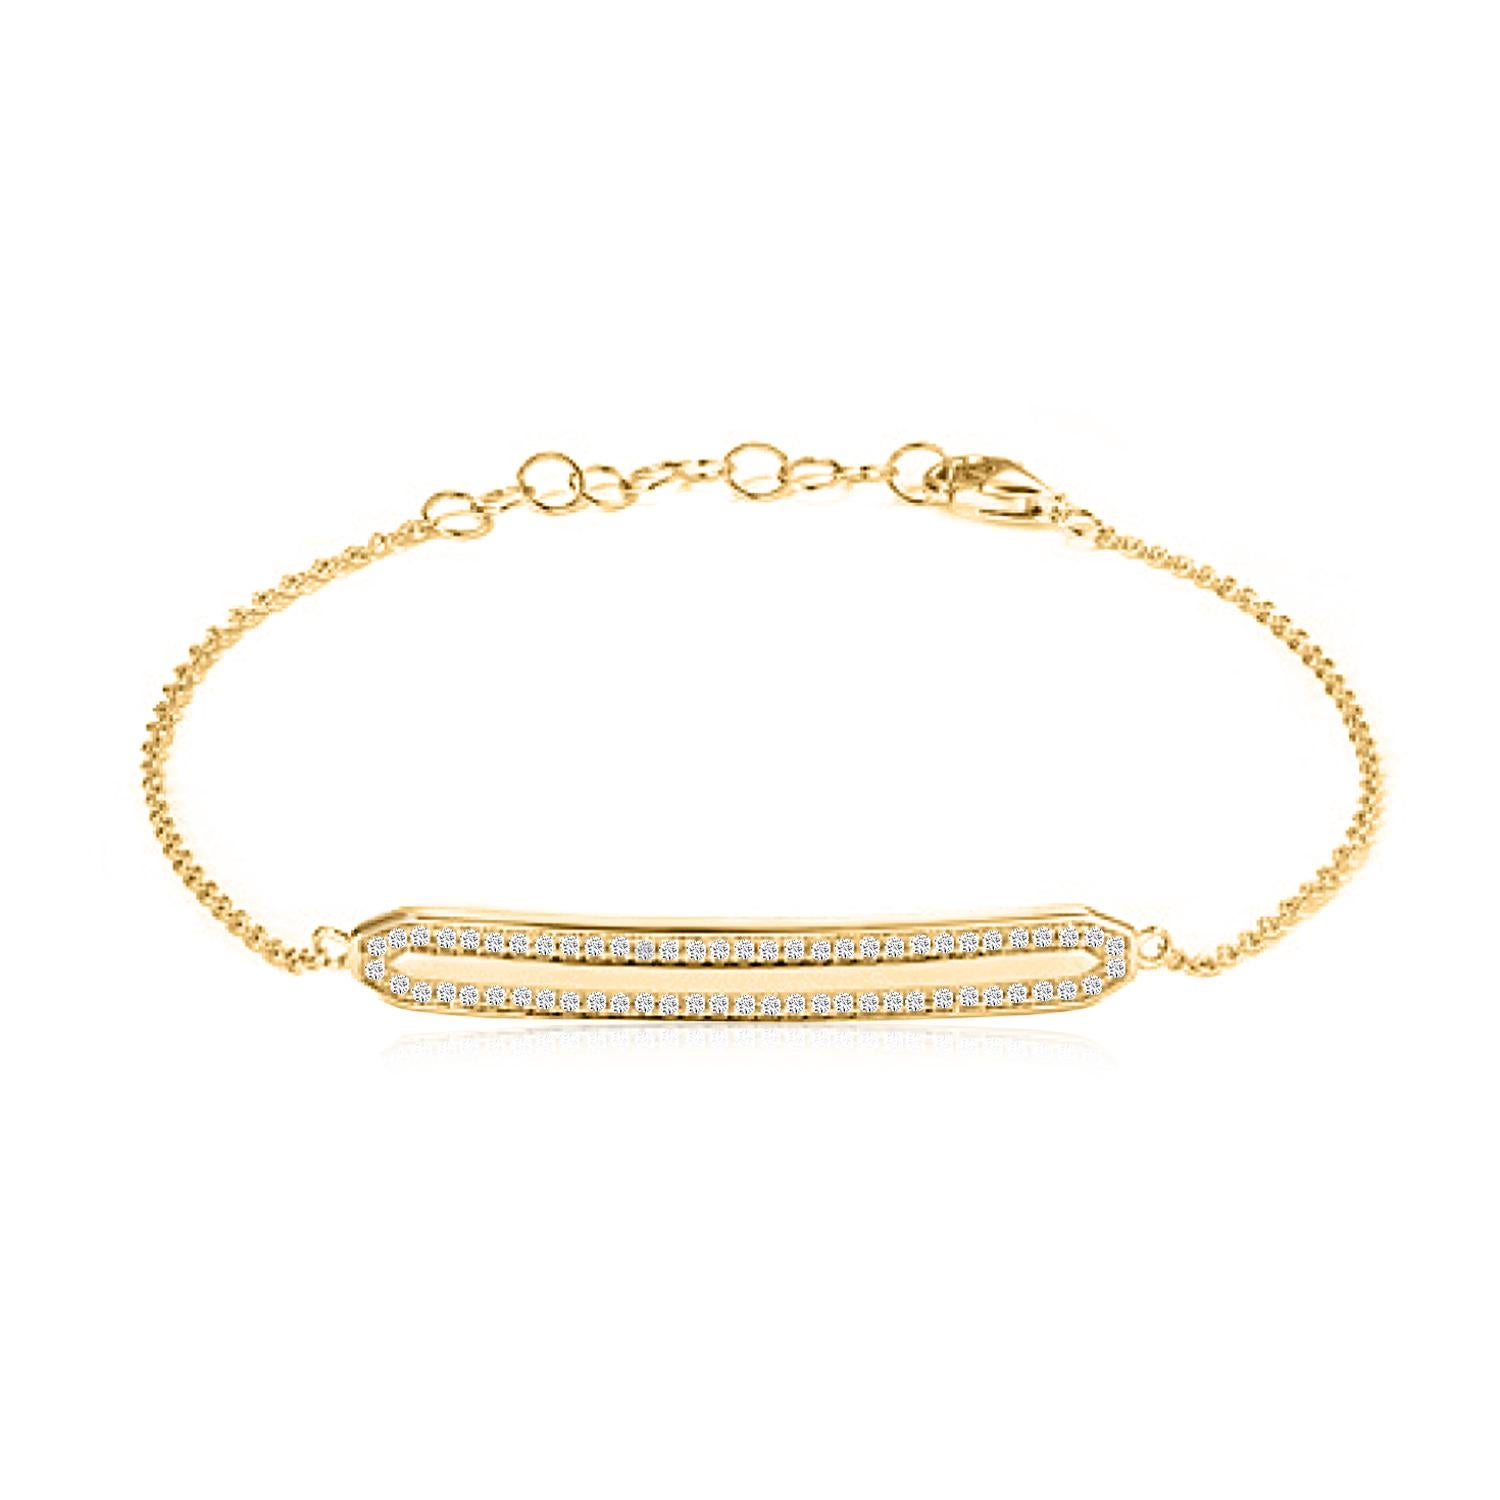 14K Gold Diamond Bar Adjustable Bracelet Information:

Diamond Type : Natural Diamond
Metal : 14k Gold
Metal Color : Rose Gold, Yellow Gold, White Gold
Total Carat Weight : 0.28 ttcw
Diamond colour-clarity : G/H Color VS/Si1 Clarity
 

JEWELRY